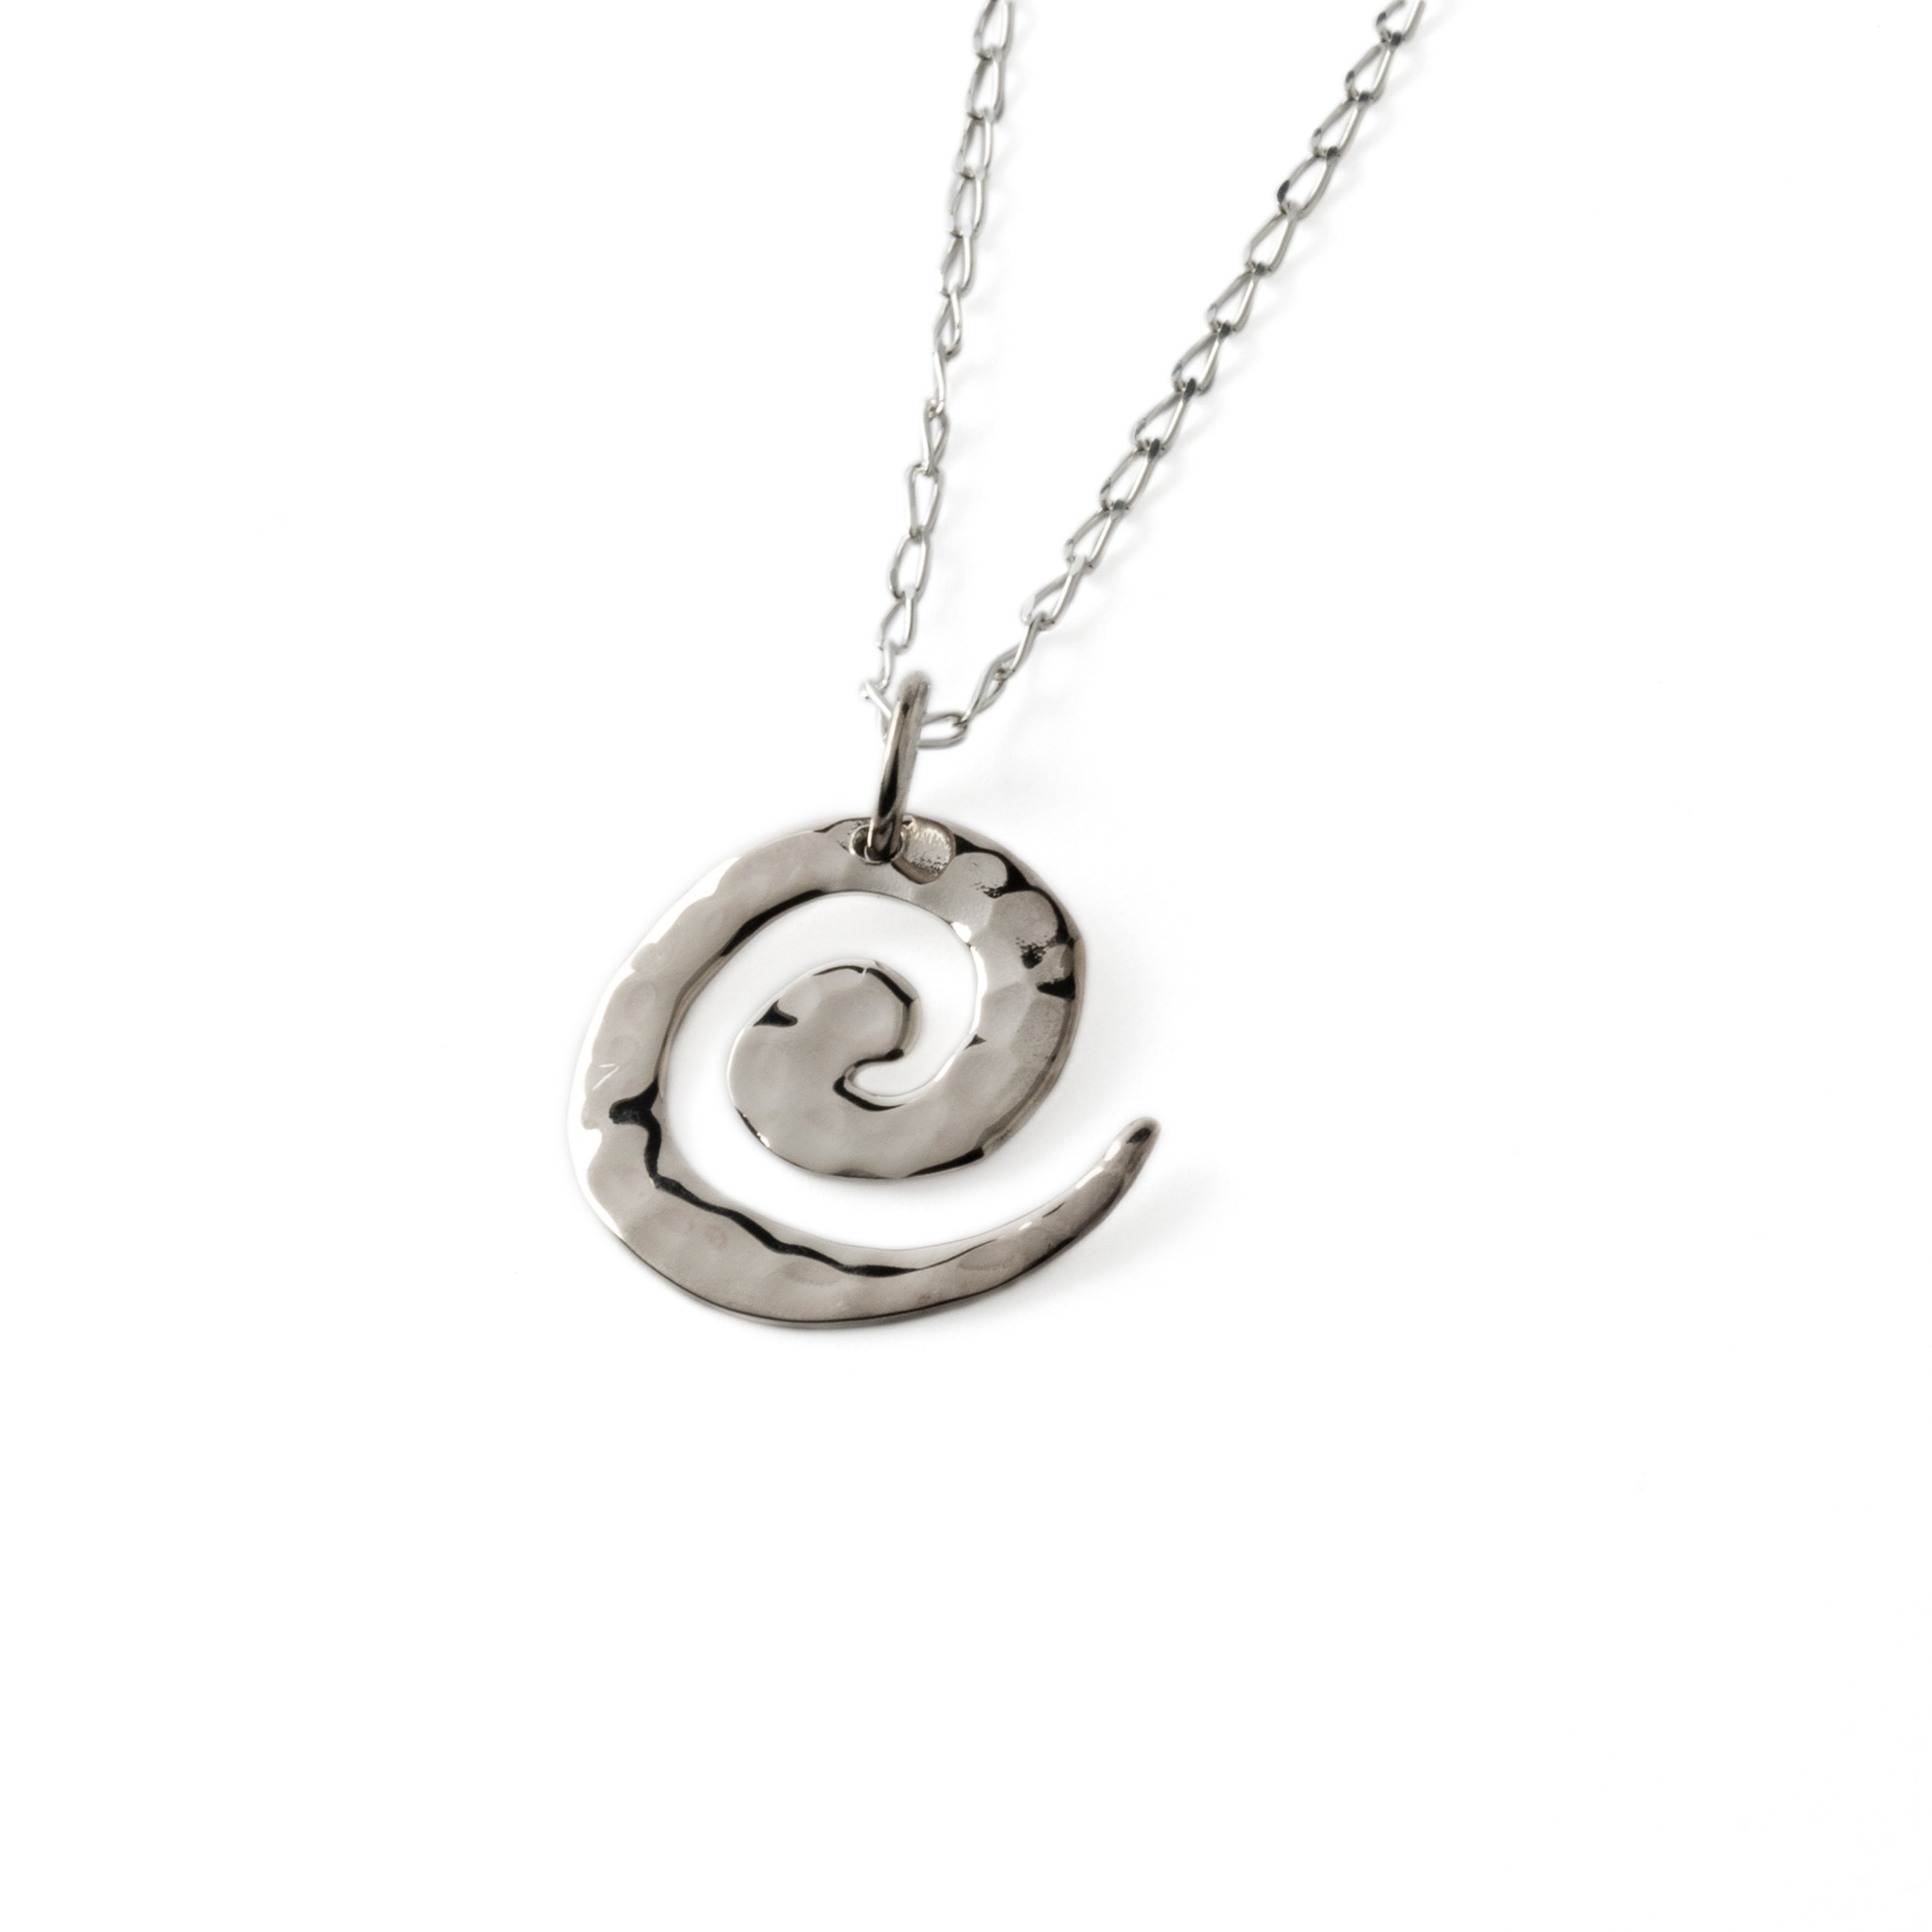 Hammered silver spiral charm necklace right side view